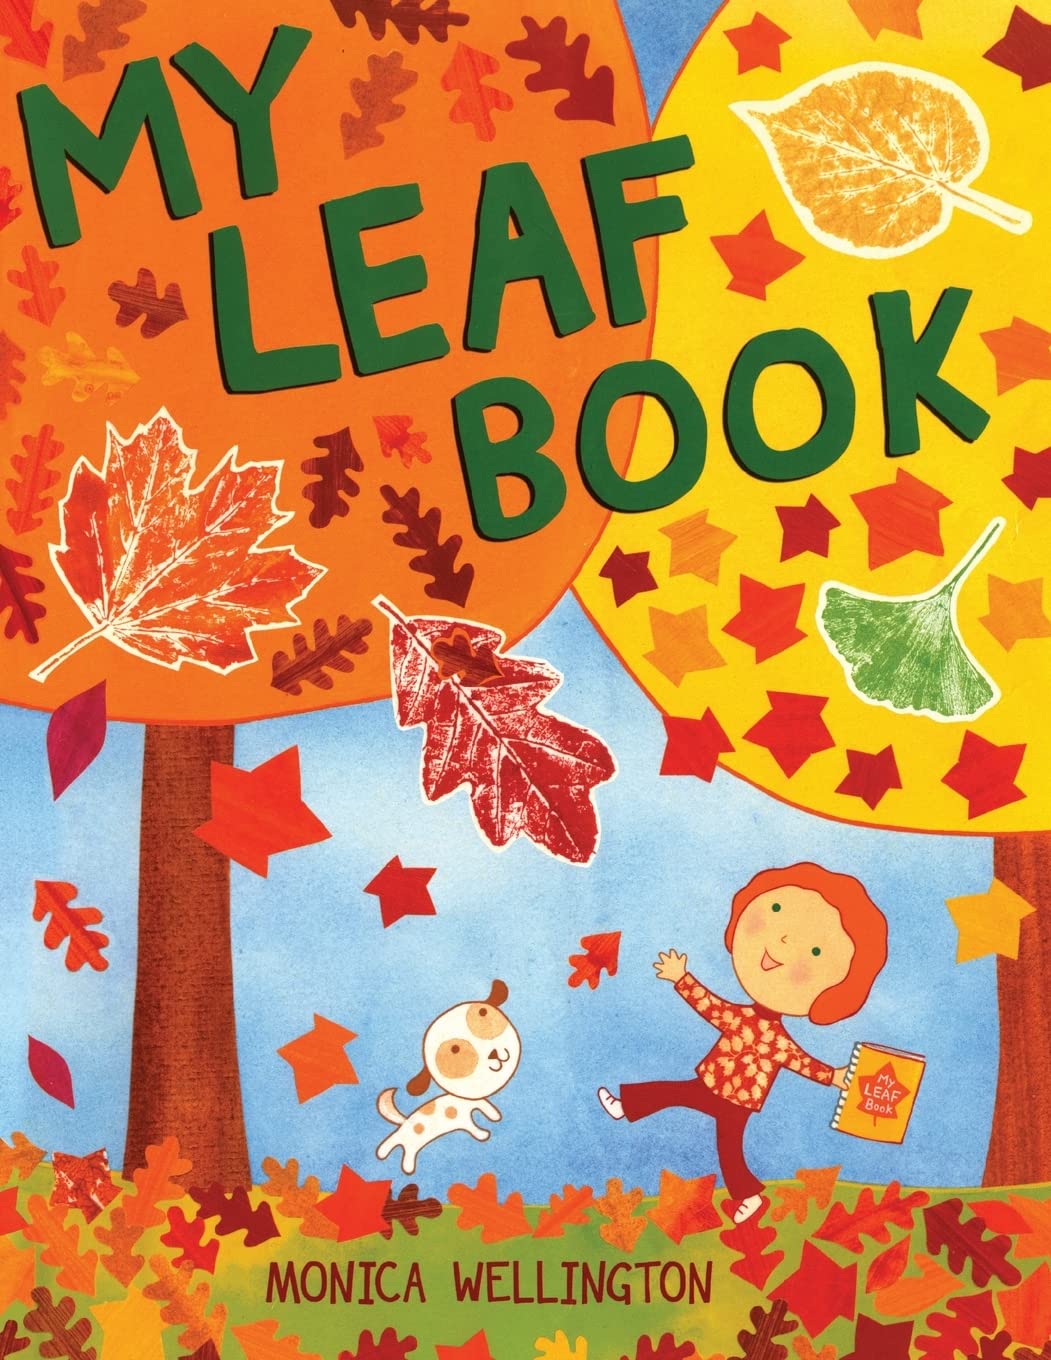 speech and language teaching concepts for My Leaf Book in speech therapy​ ​